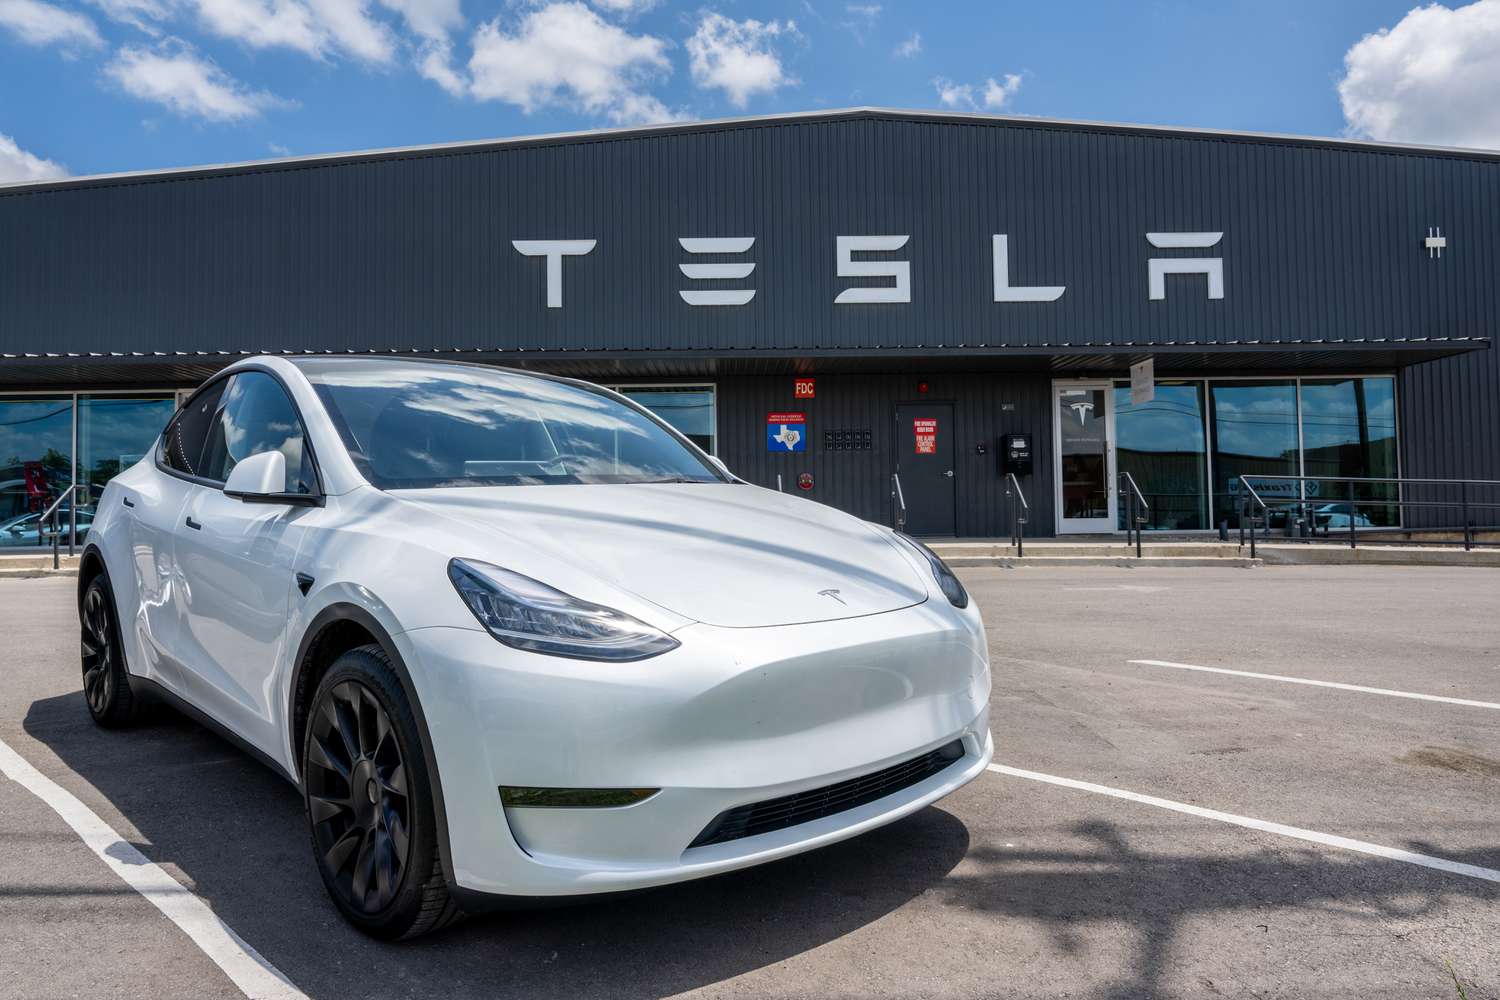 Tesla's Big Challenge: Analysts Predict a Sharp Drop in Stock Value Amid Growing Competition